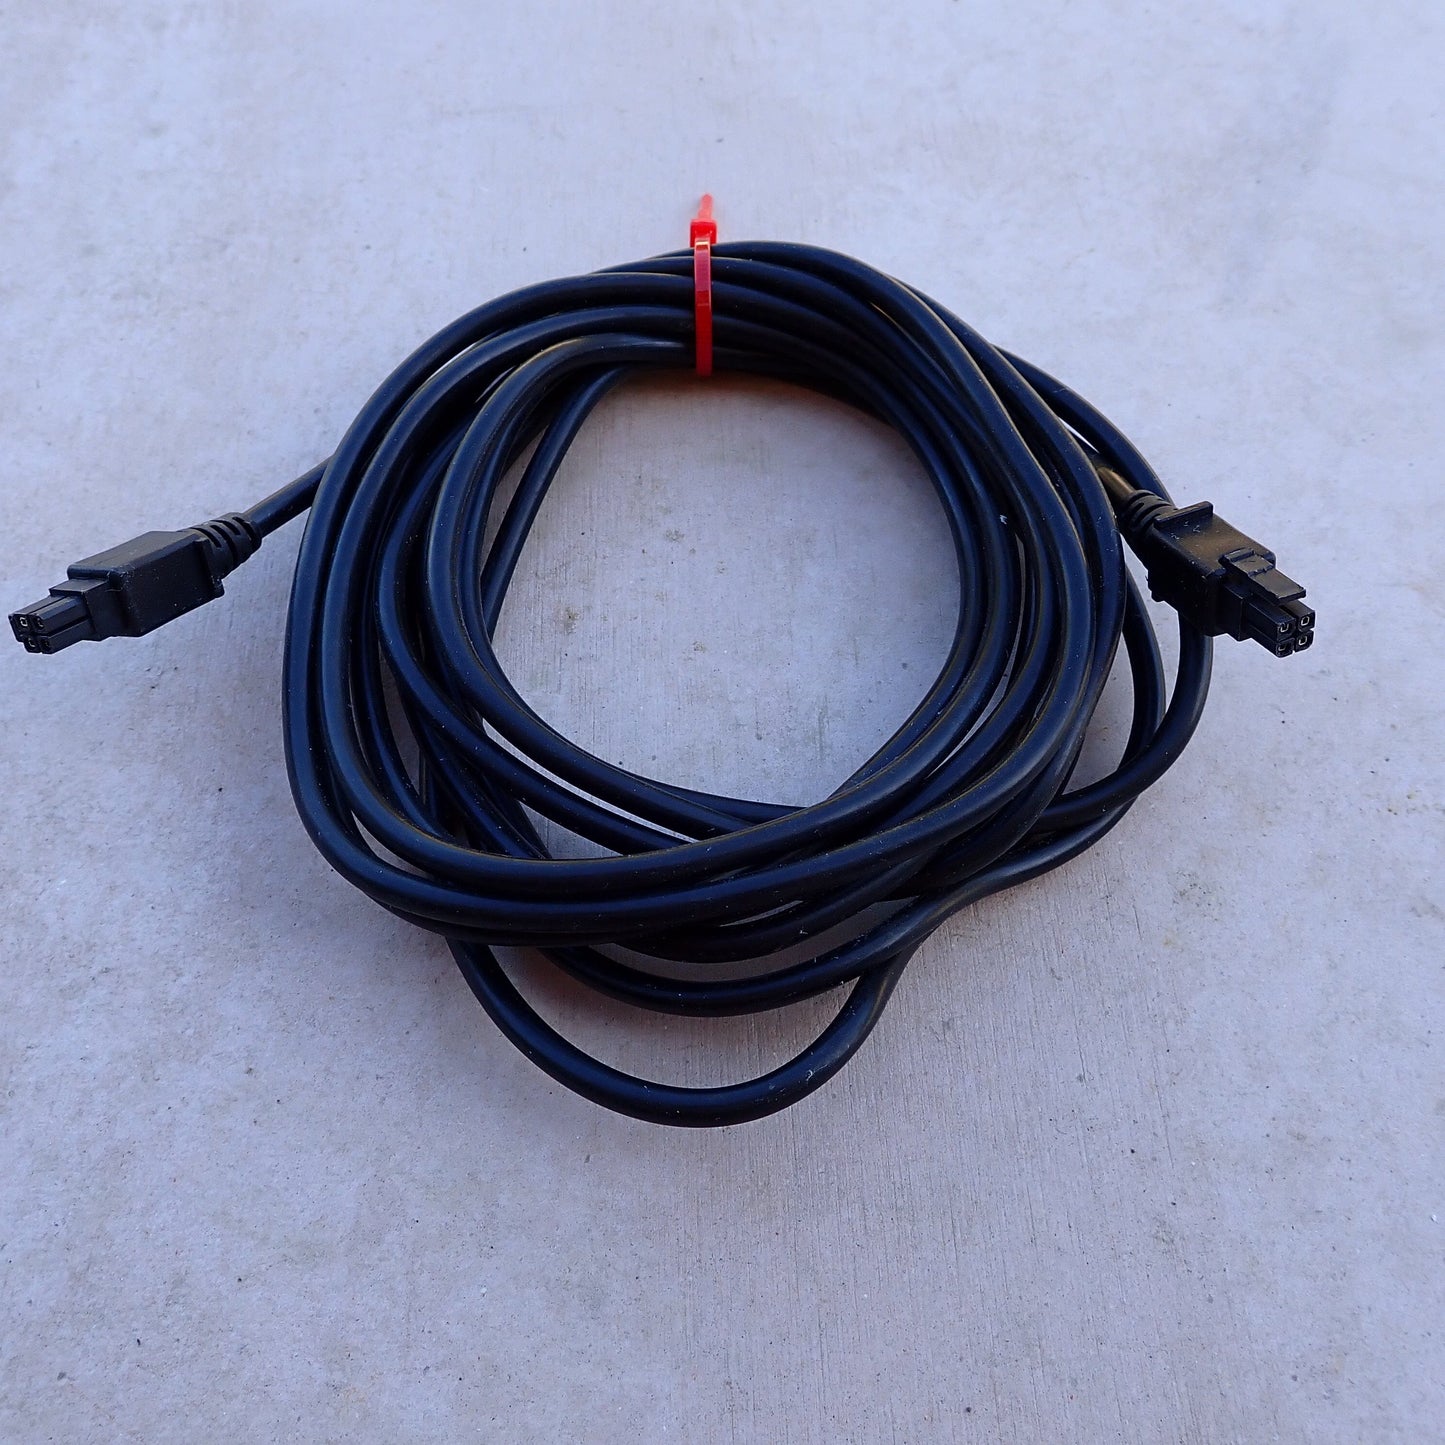 Neptune 1 Link Cable M to M - Used